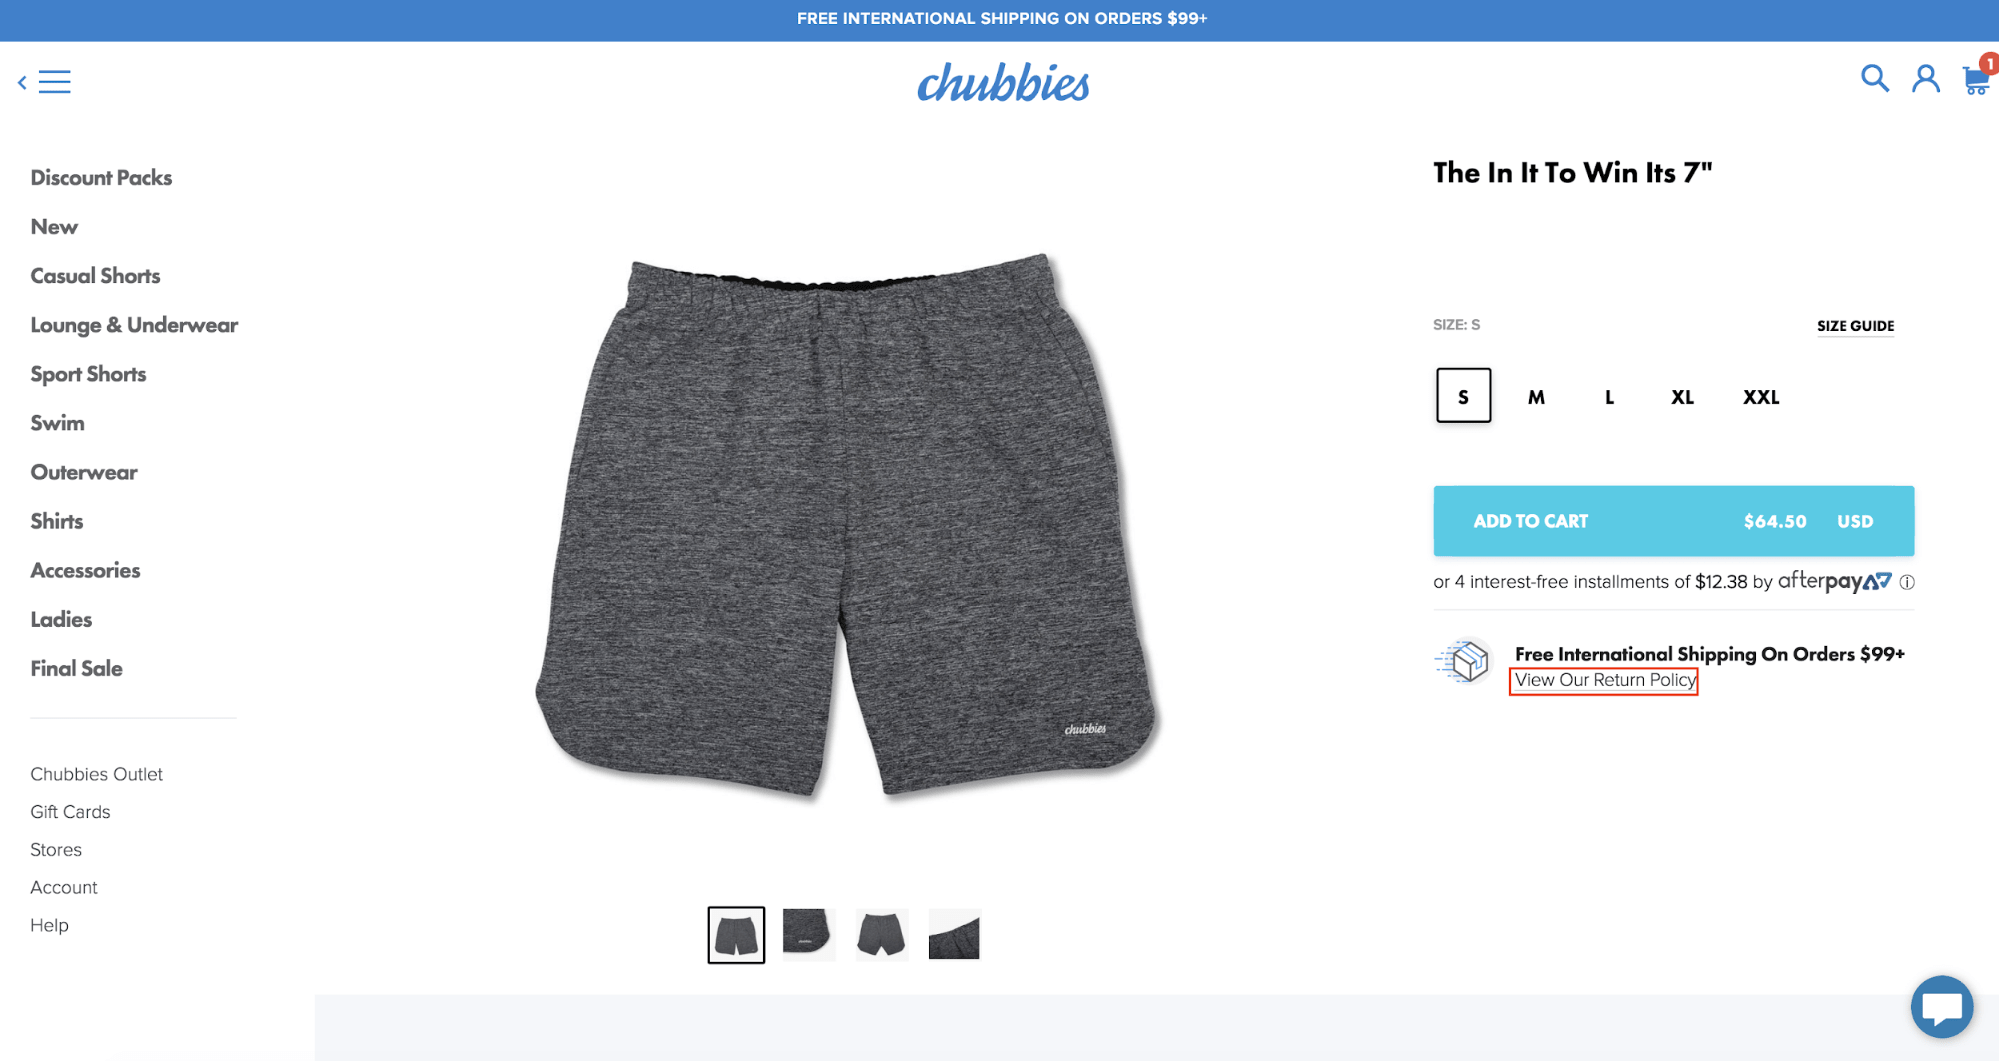 chubbies returns and exchanges policy on product page